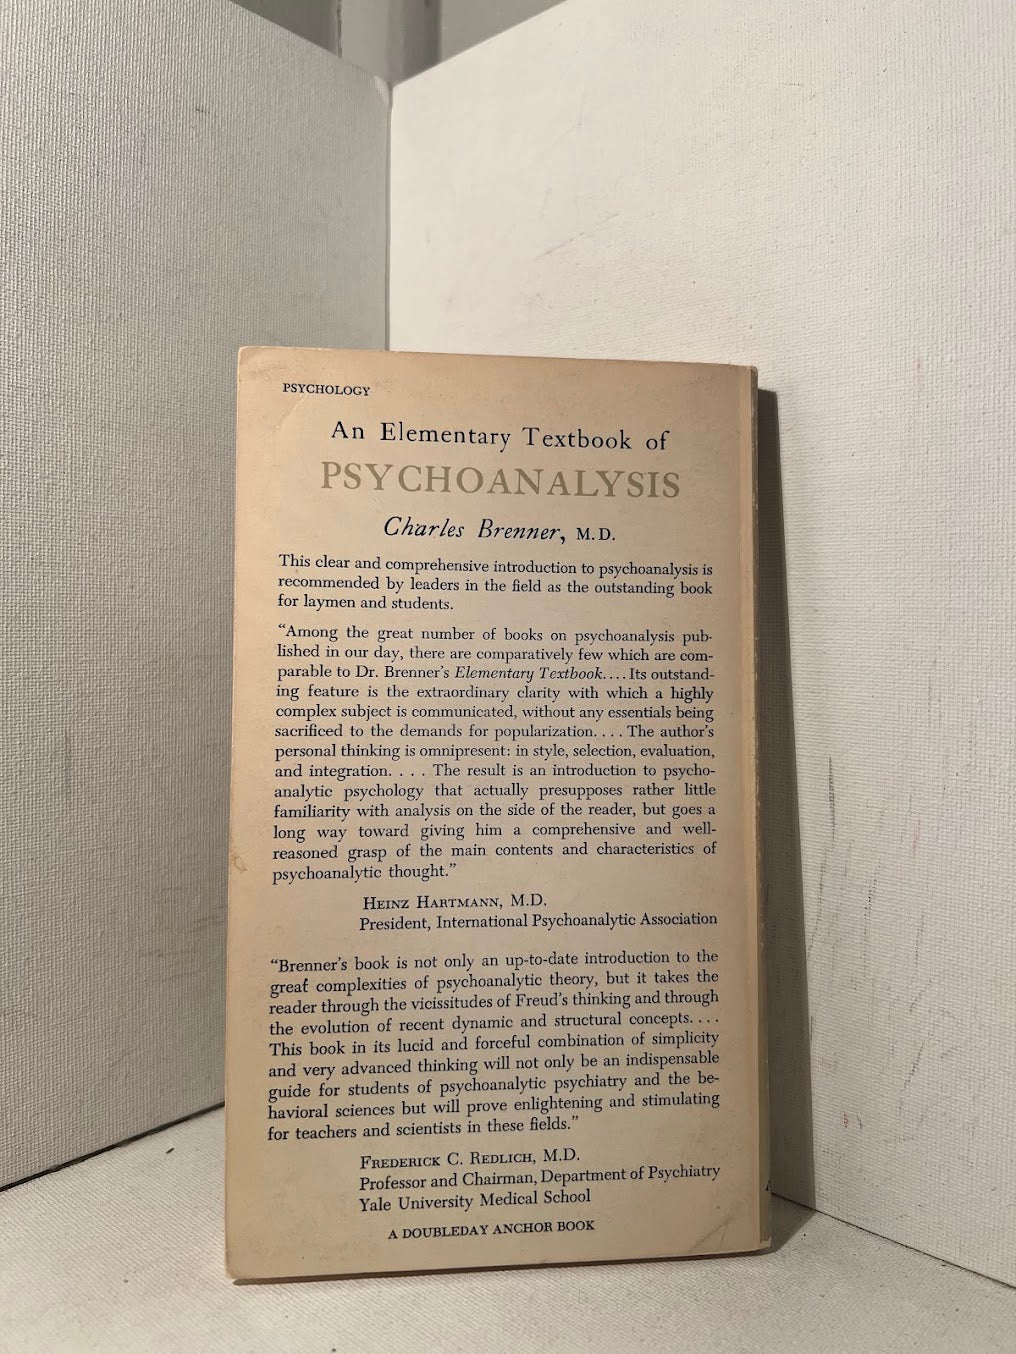 An Elementary Textbook of Psychoanalysis by Charles Brenner